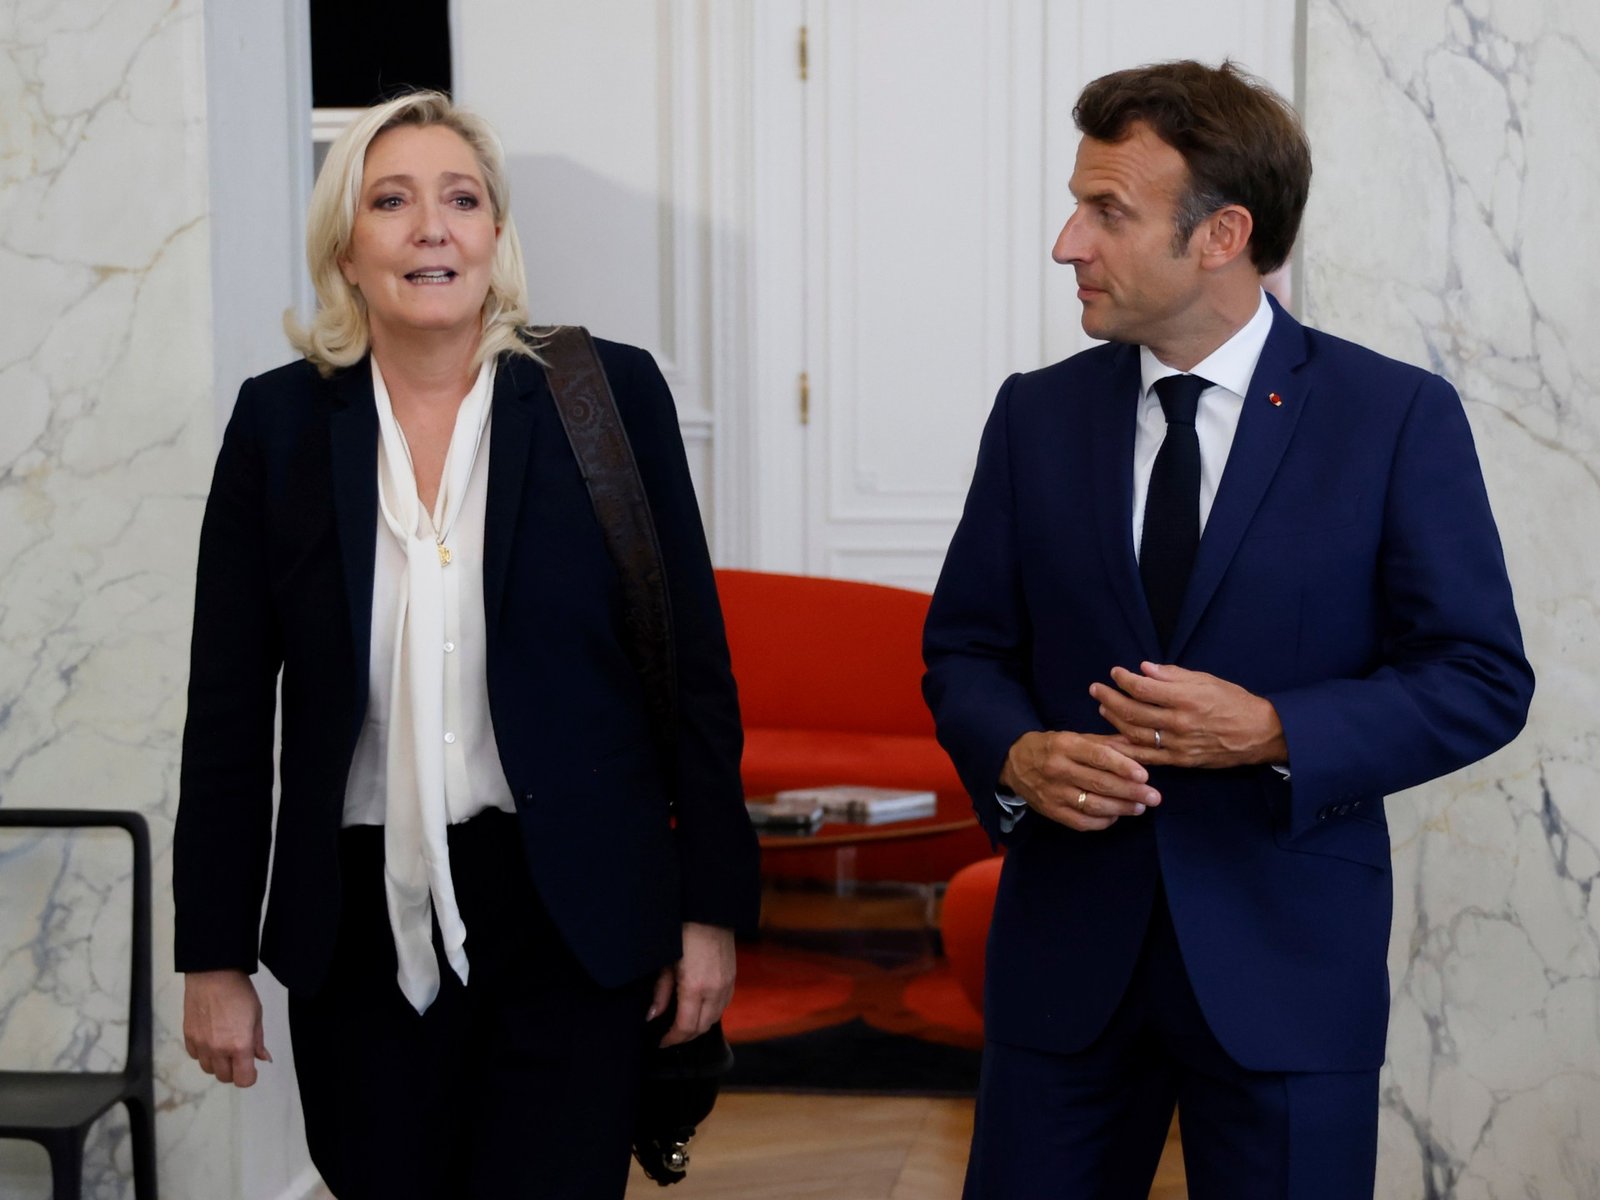 Frances far right leader Le Pen questions Macrons role as army chief | Politics News